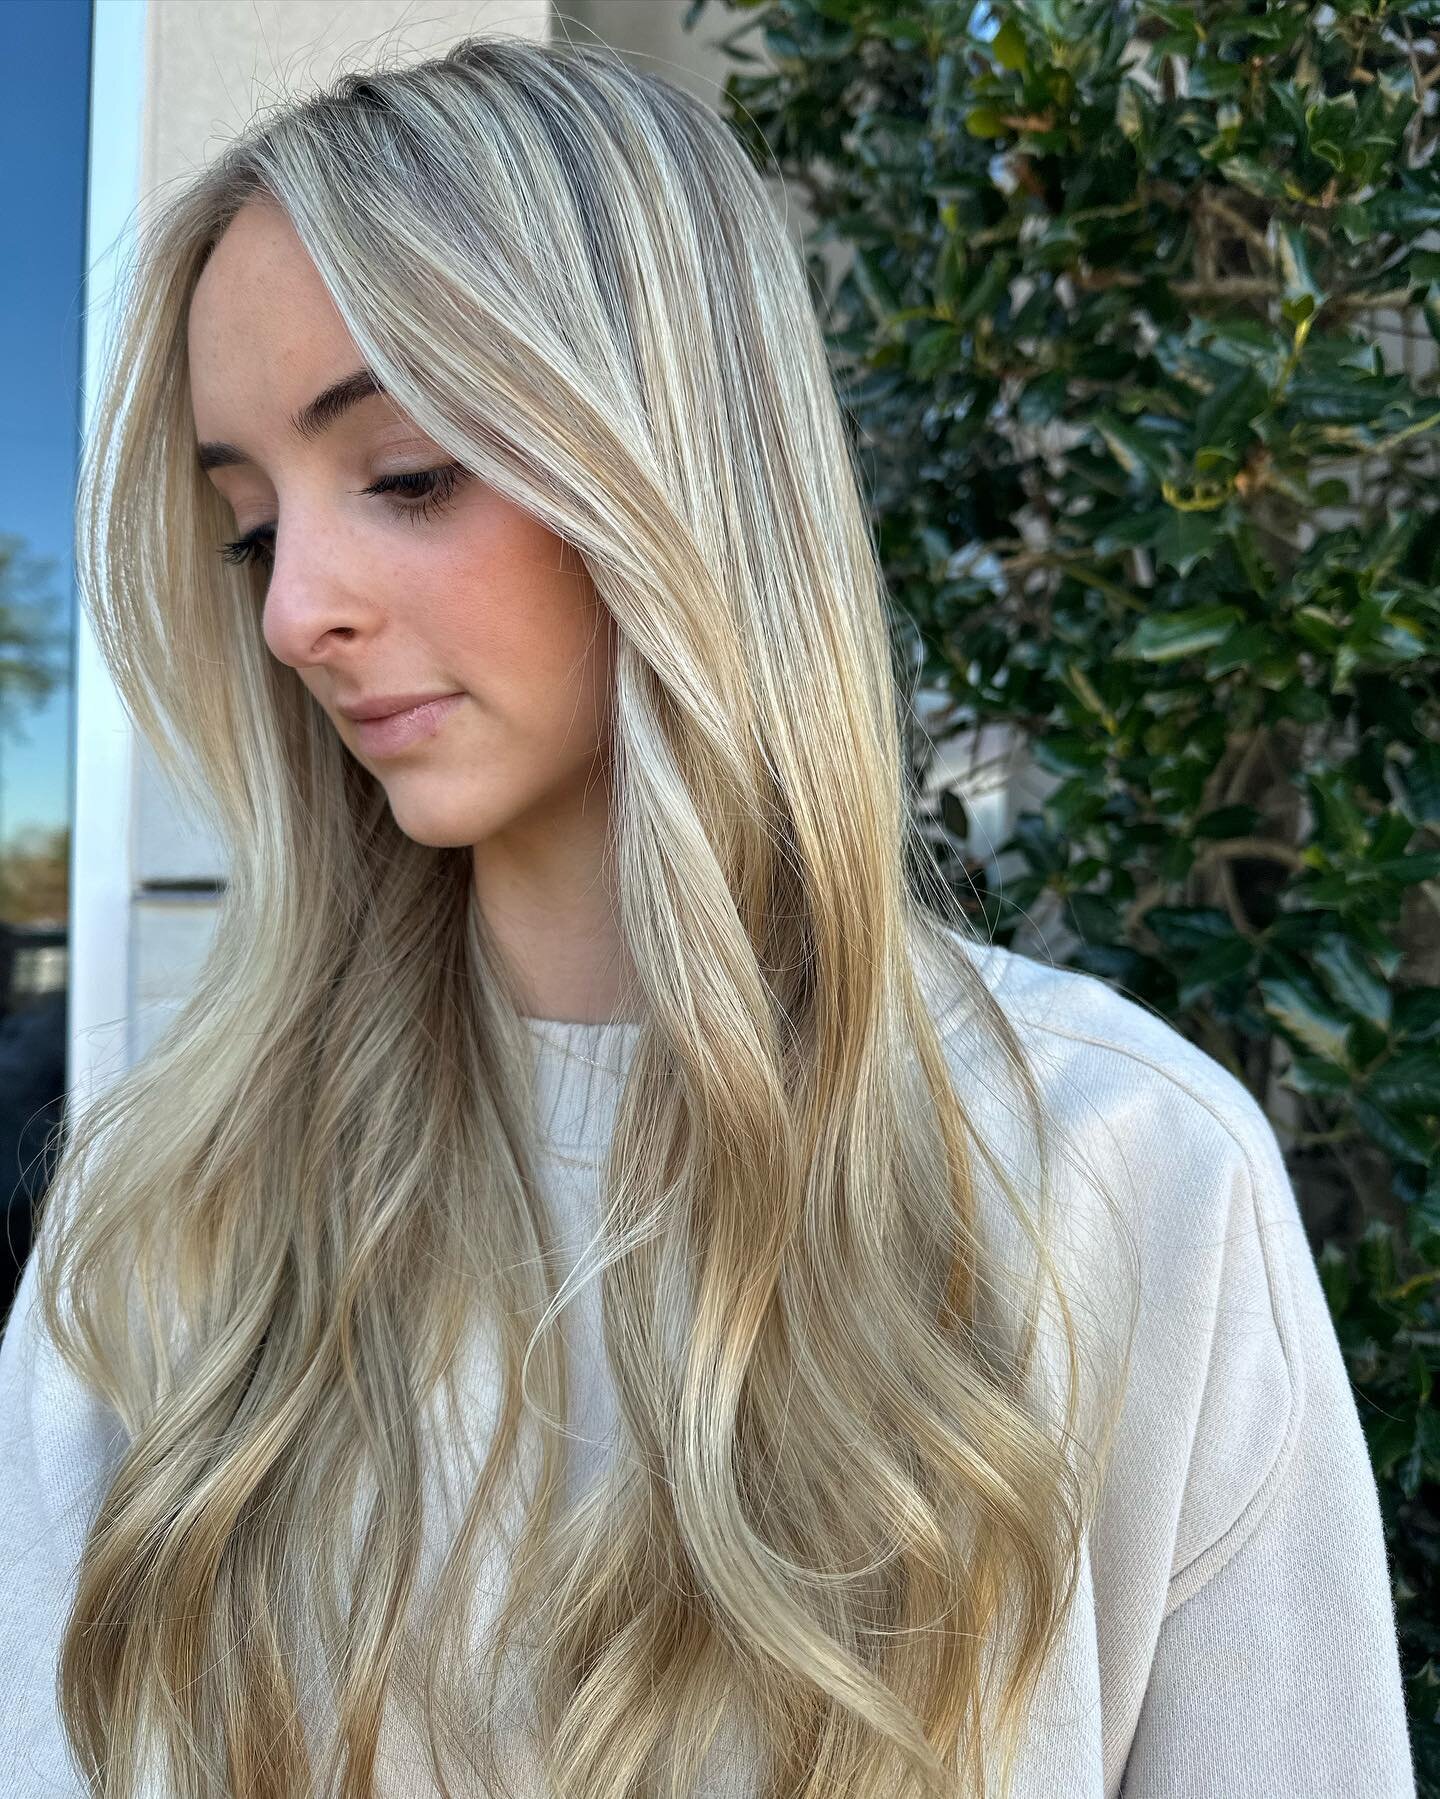 wishing for sunnier days. ☀️

the perfect amount of warmth in this gorgeous blonde by @kelly.eastandco